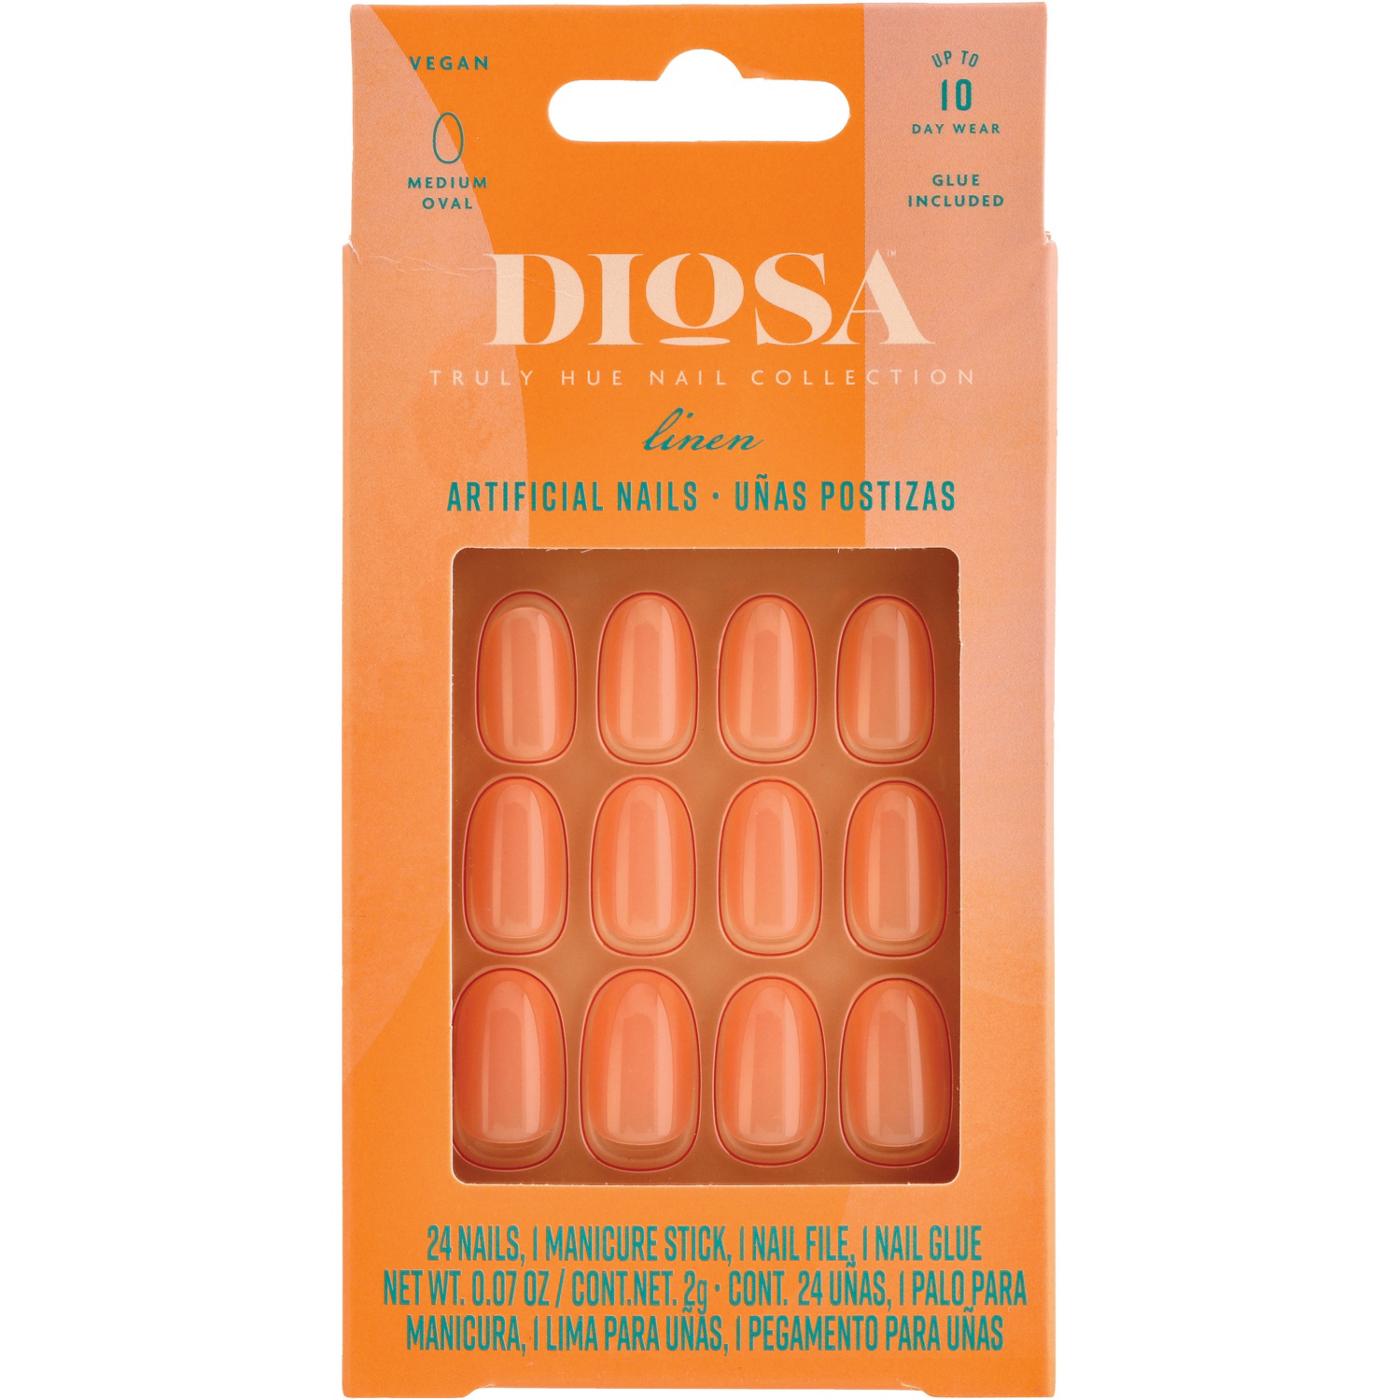 Diosa Medium Oval Artificial Nails – Truly Hue Linen; image 1 of 7